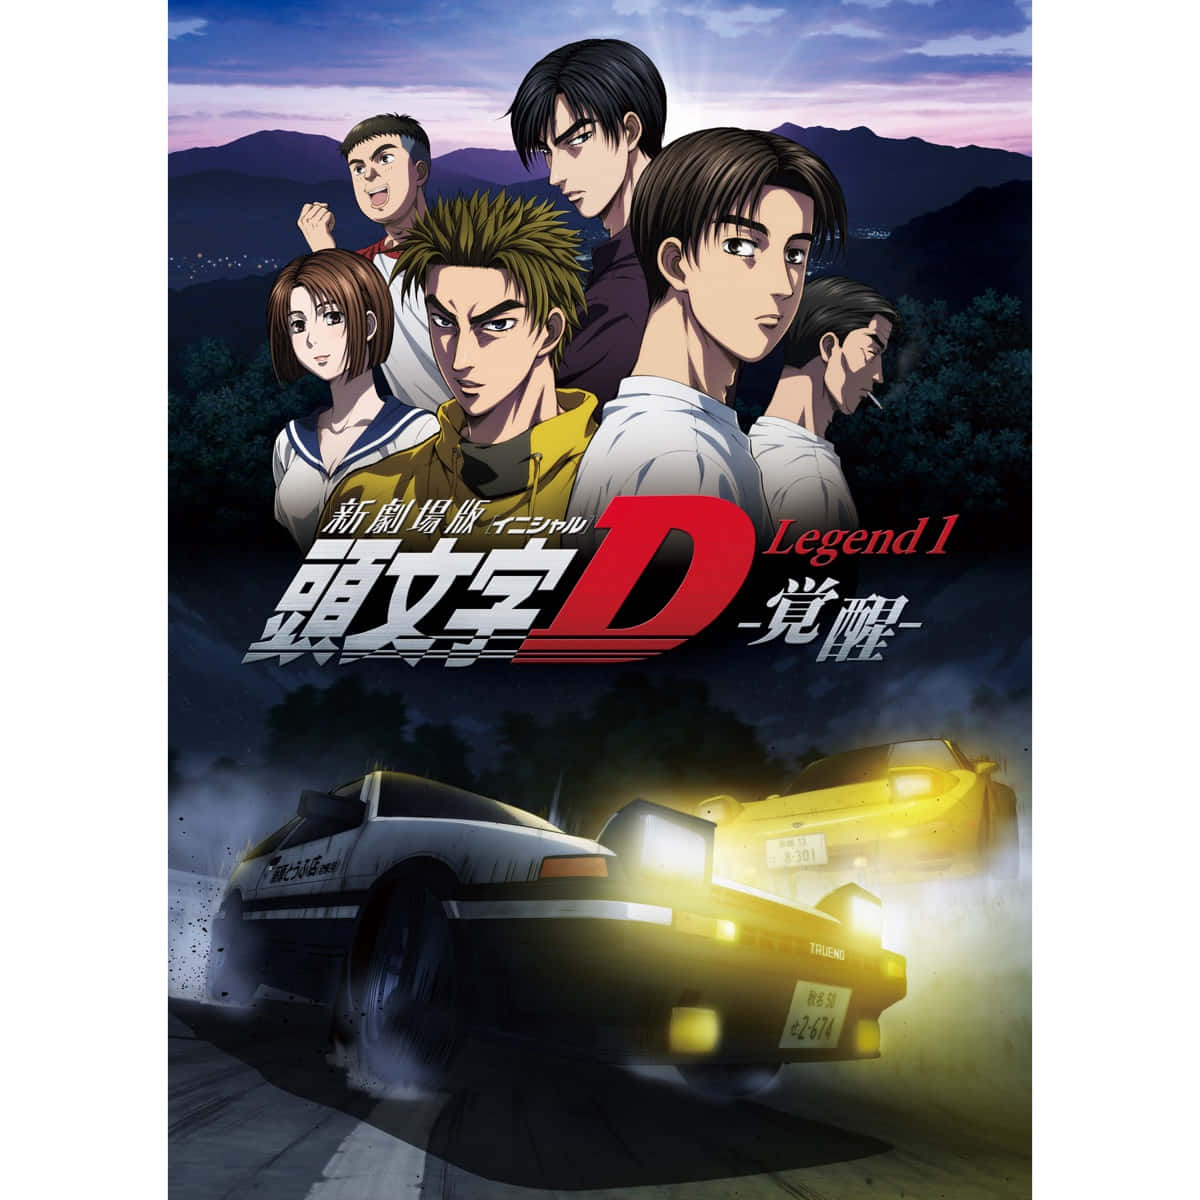 "Do you have what it takes to take on the challenge of Initial D?"